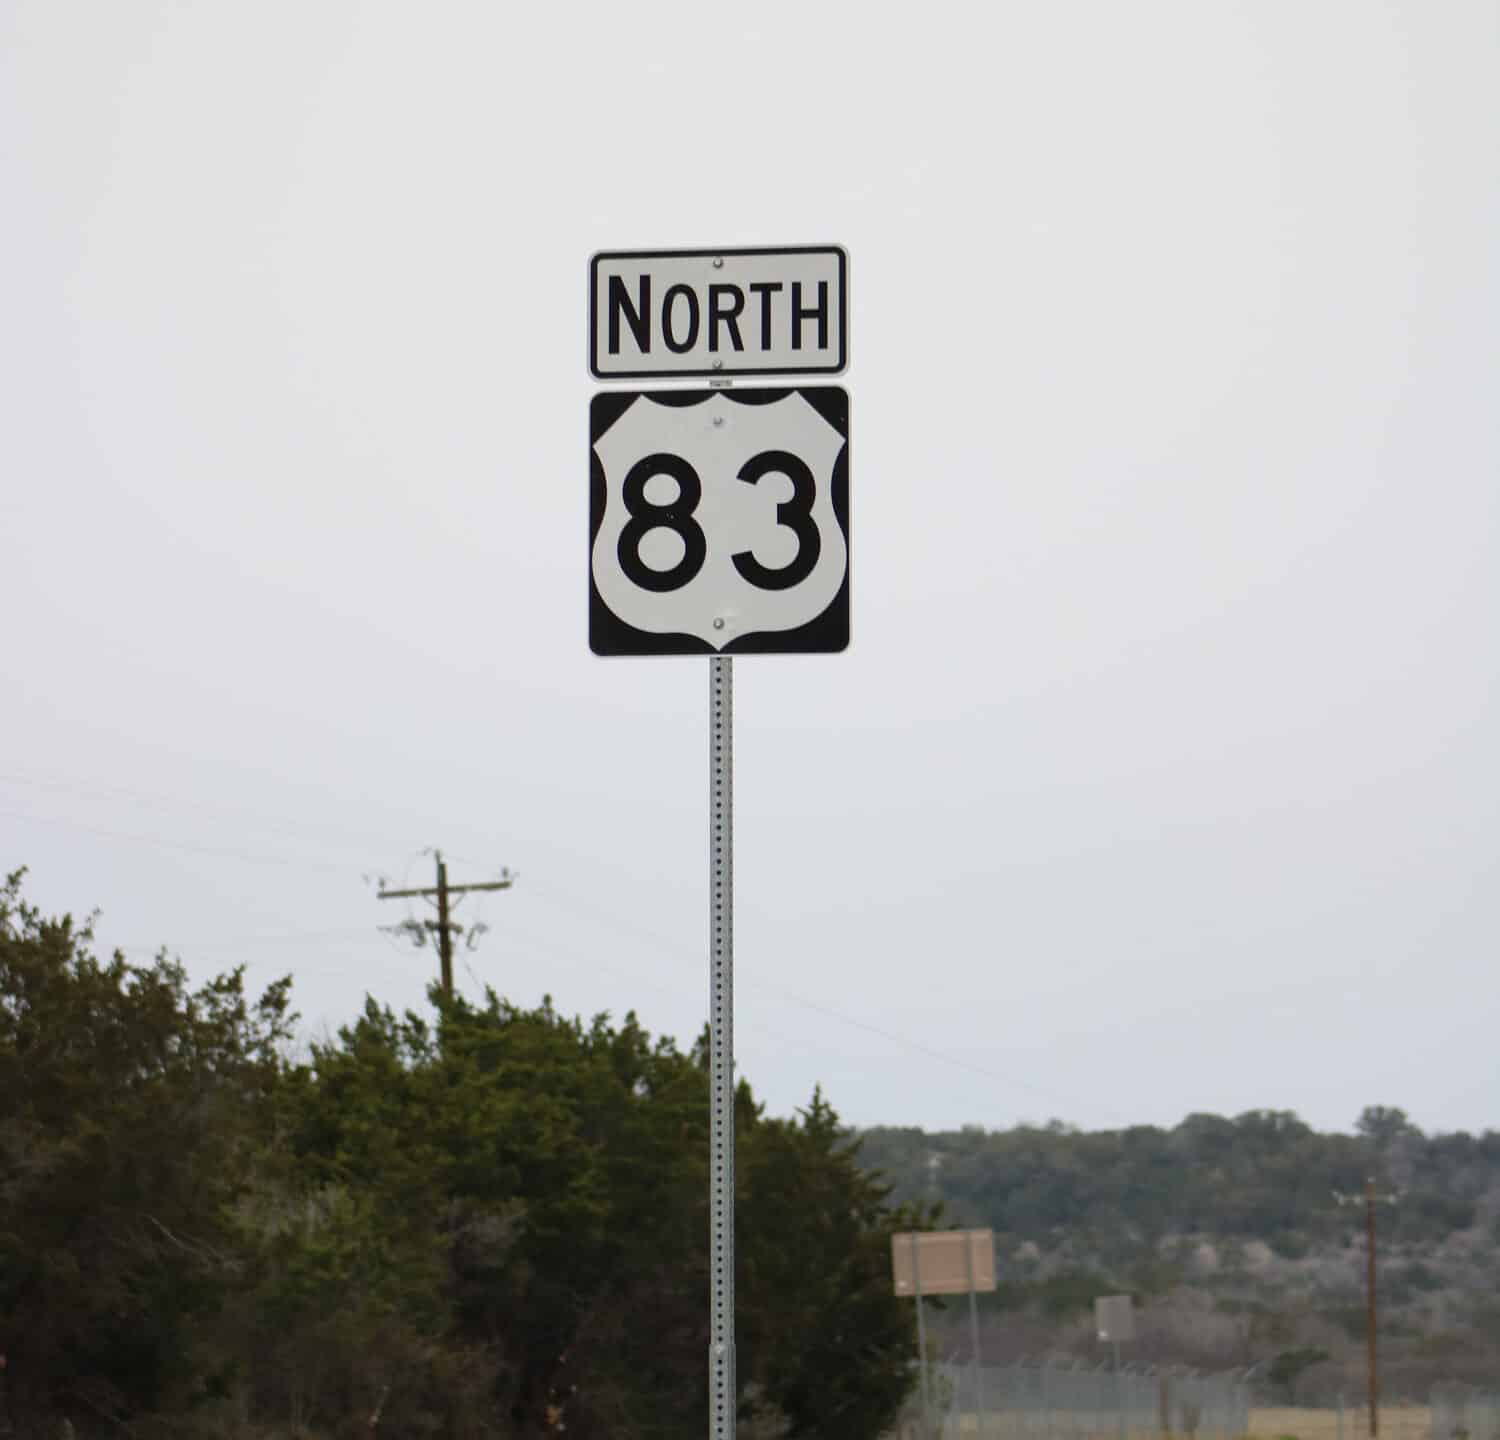 Road Sign: US Hwy 83 North, Junction, TX (February 19, 2019)